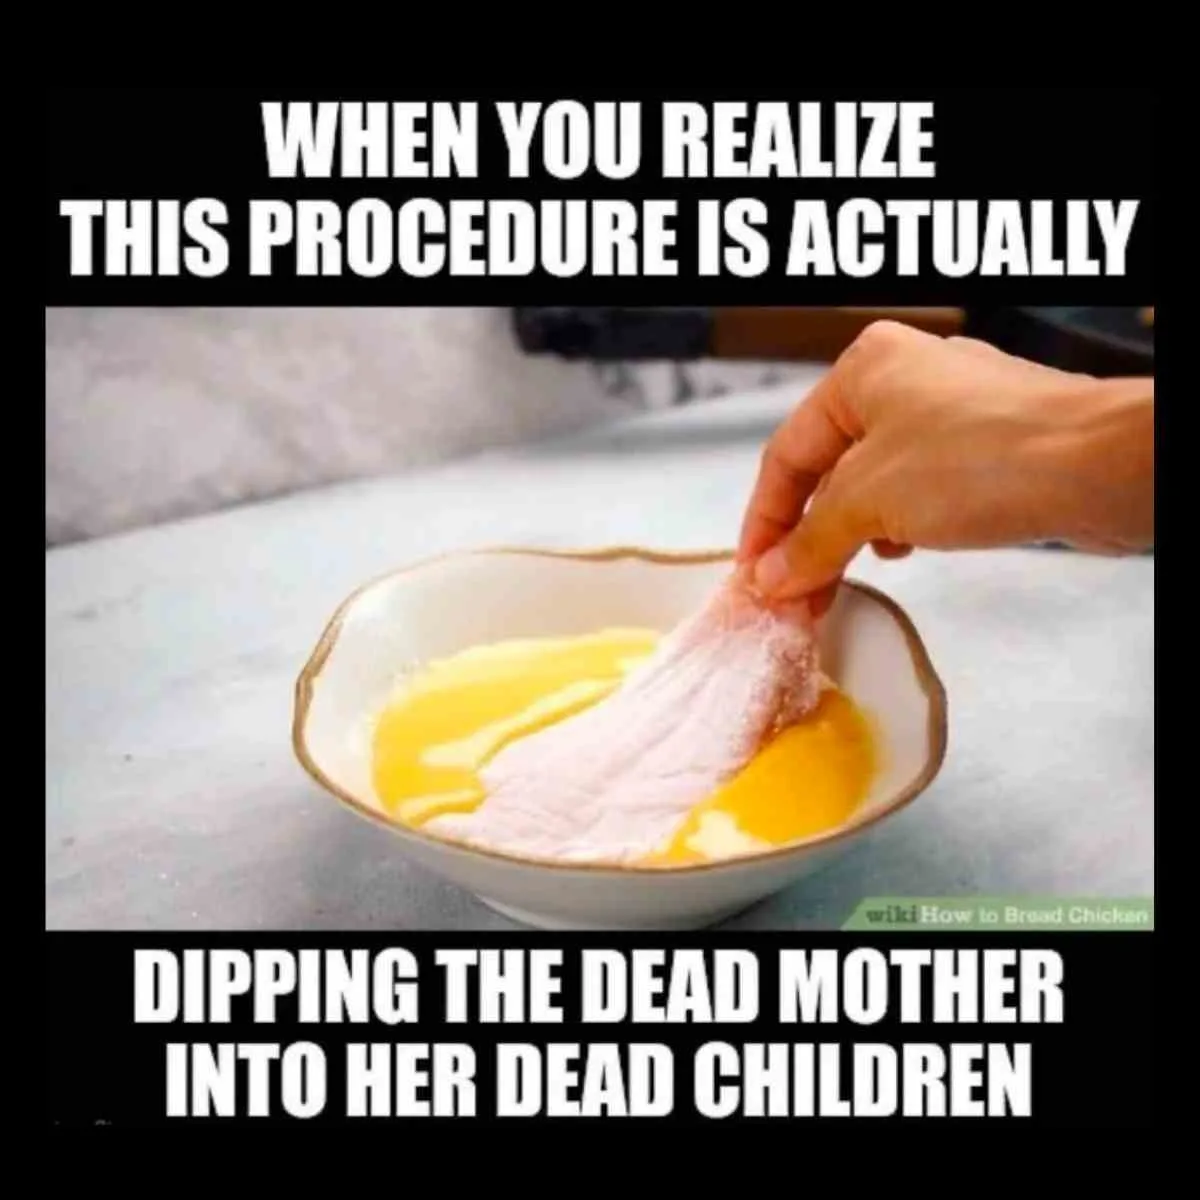 egg chicken meme when you realize this procedure is actually dipping the mother into her children